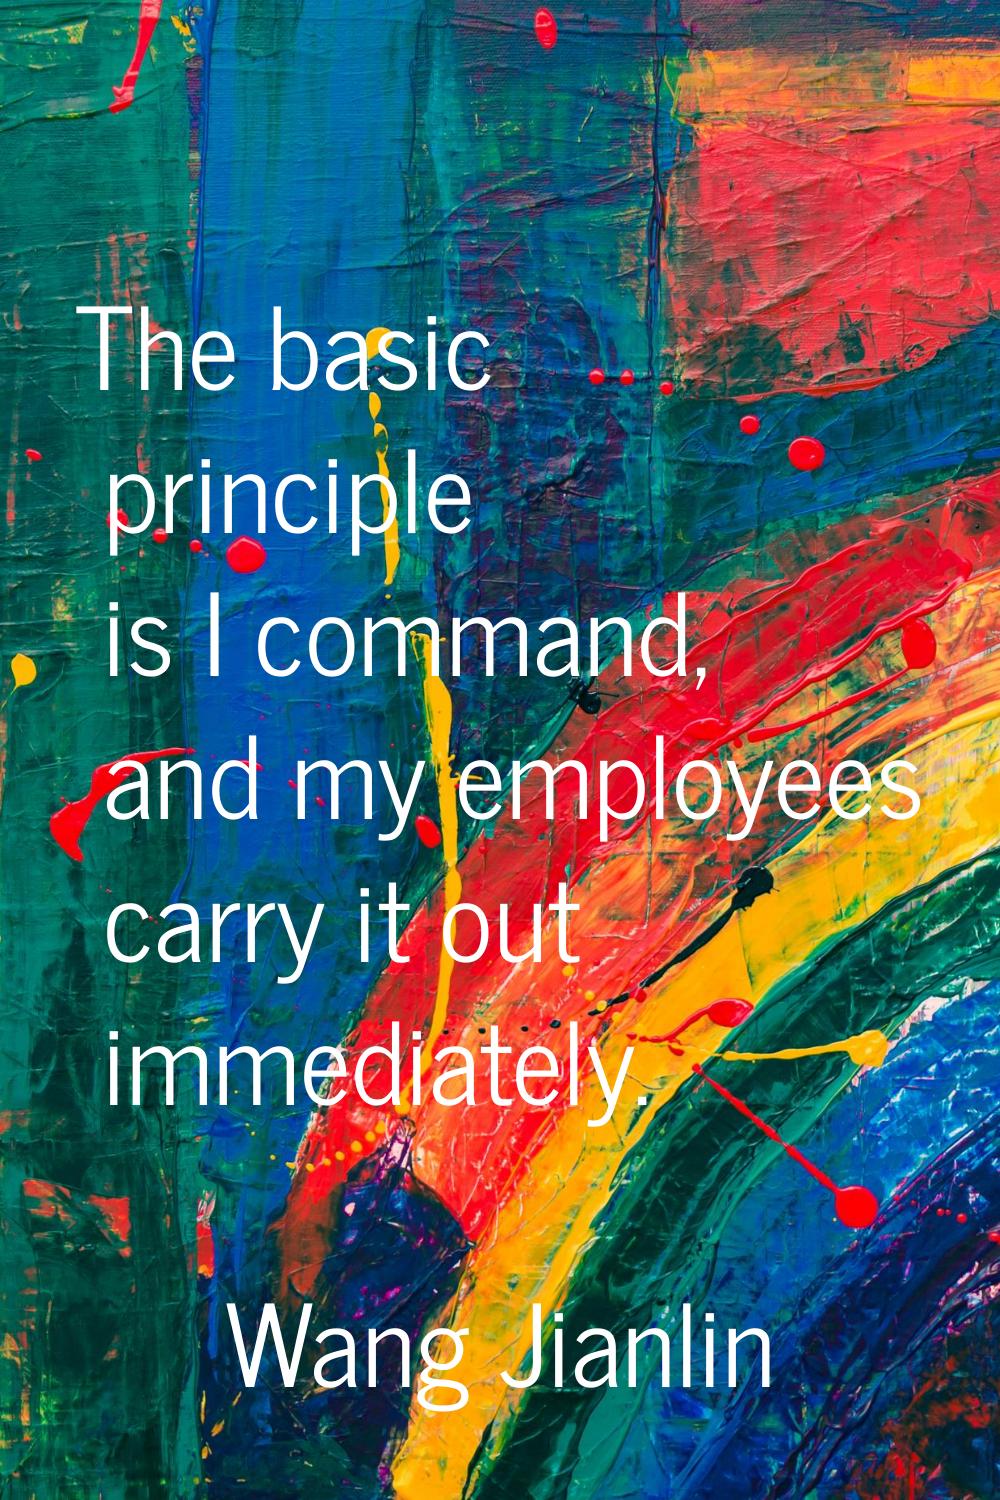 The basic principle is I command, and my employees carry it out immediately.